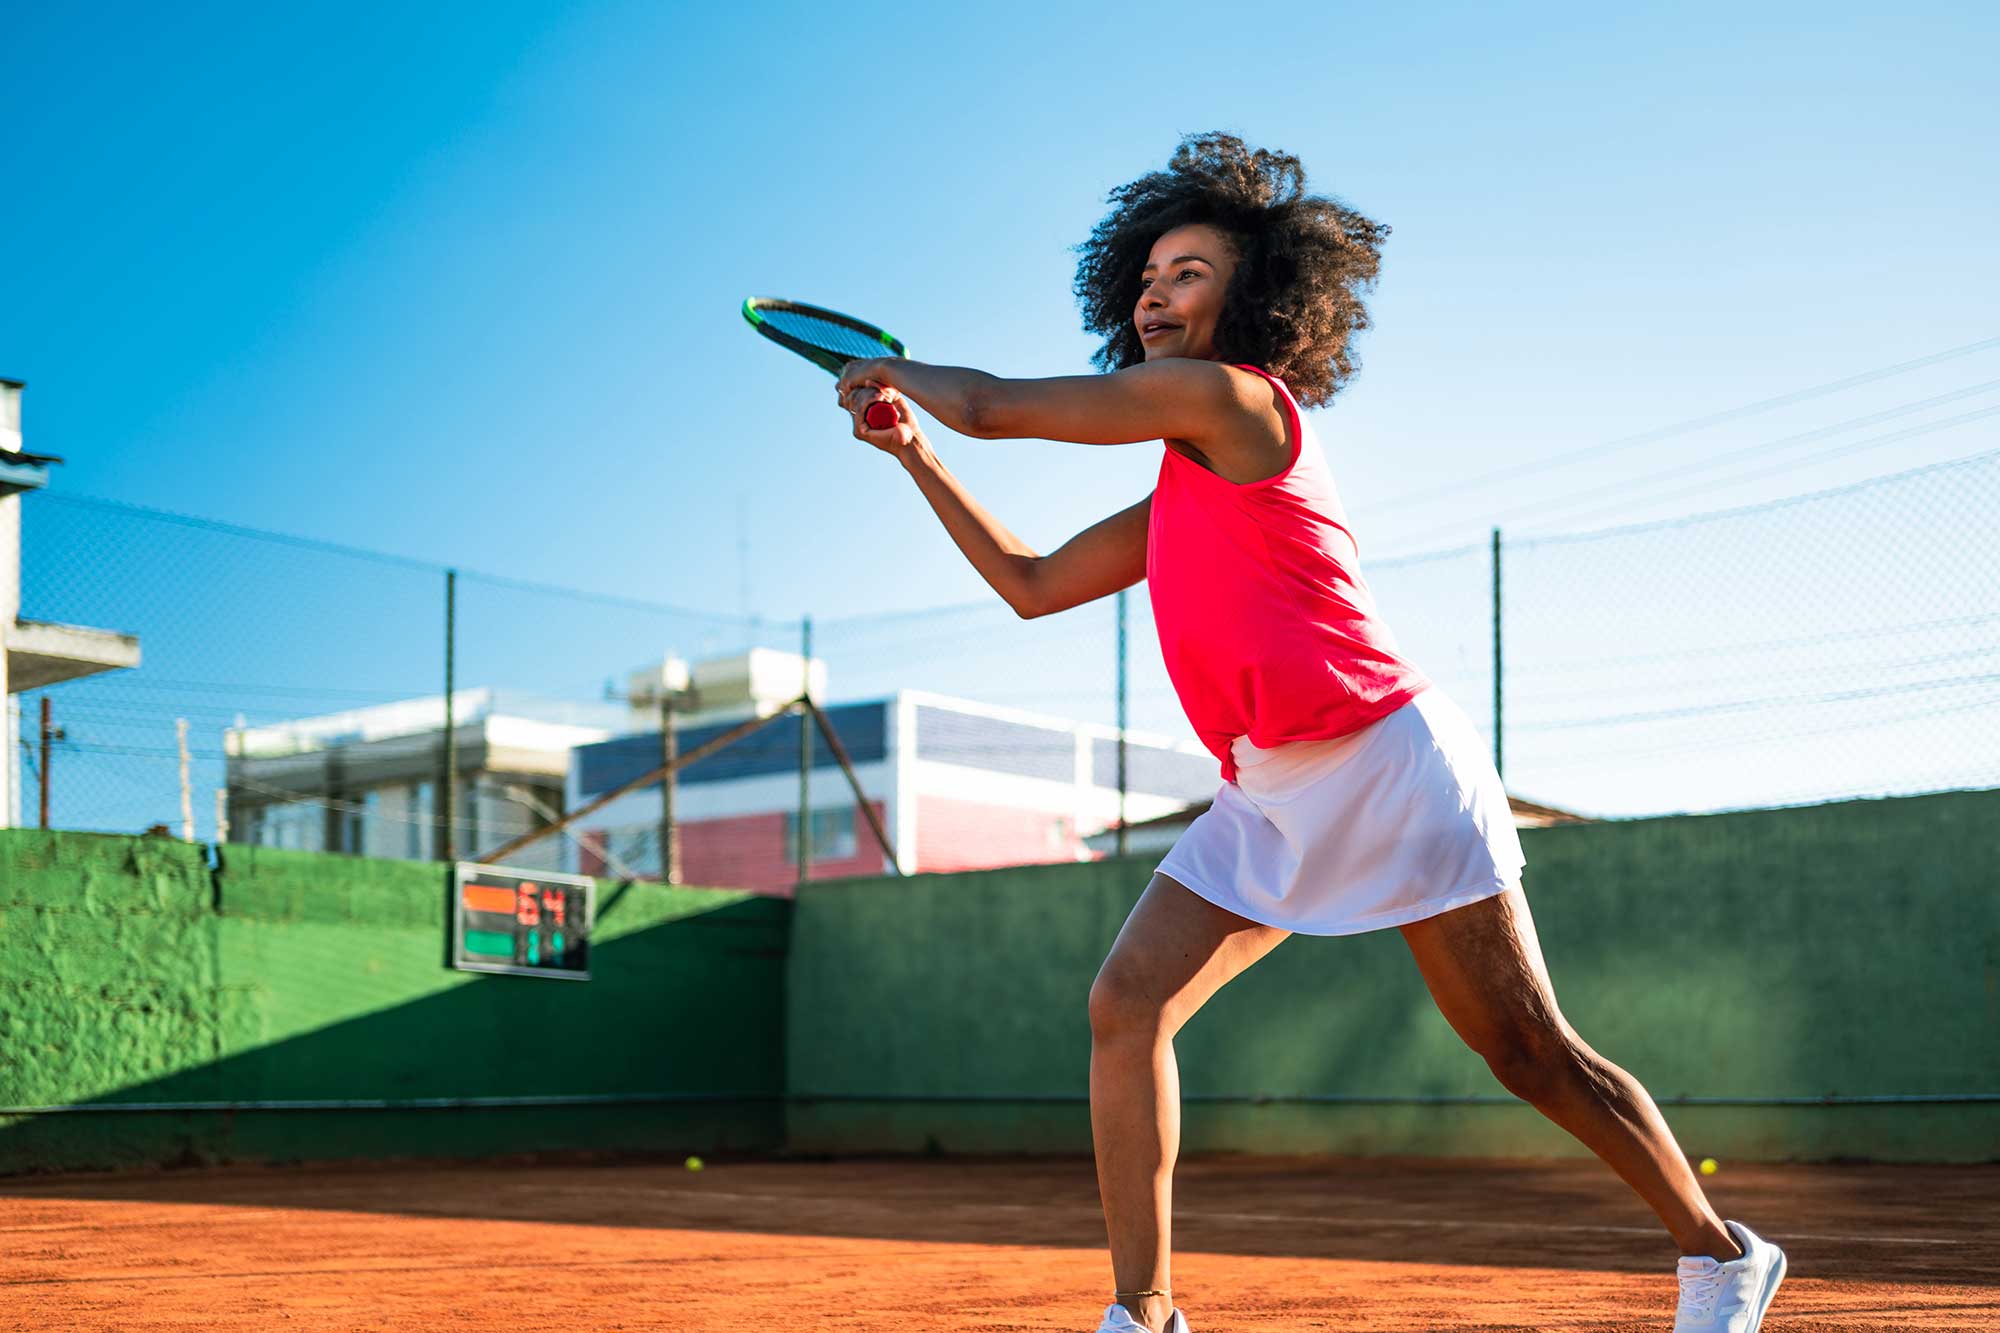 Tennis-Inspired Fashion Finds to Channel Your Inner Star